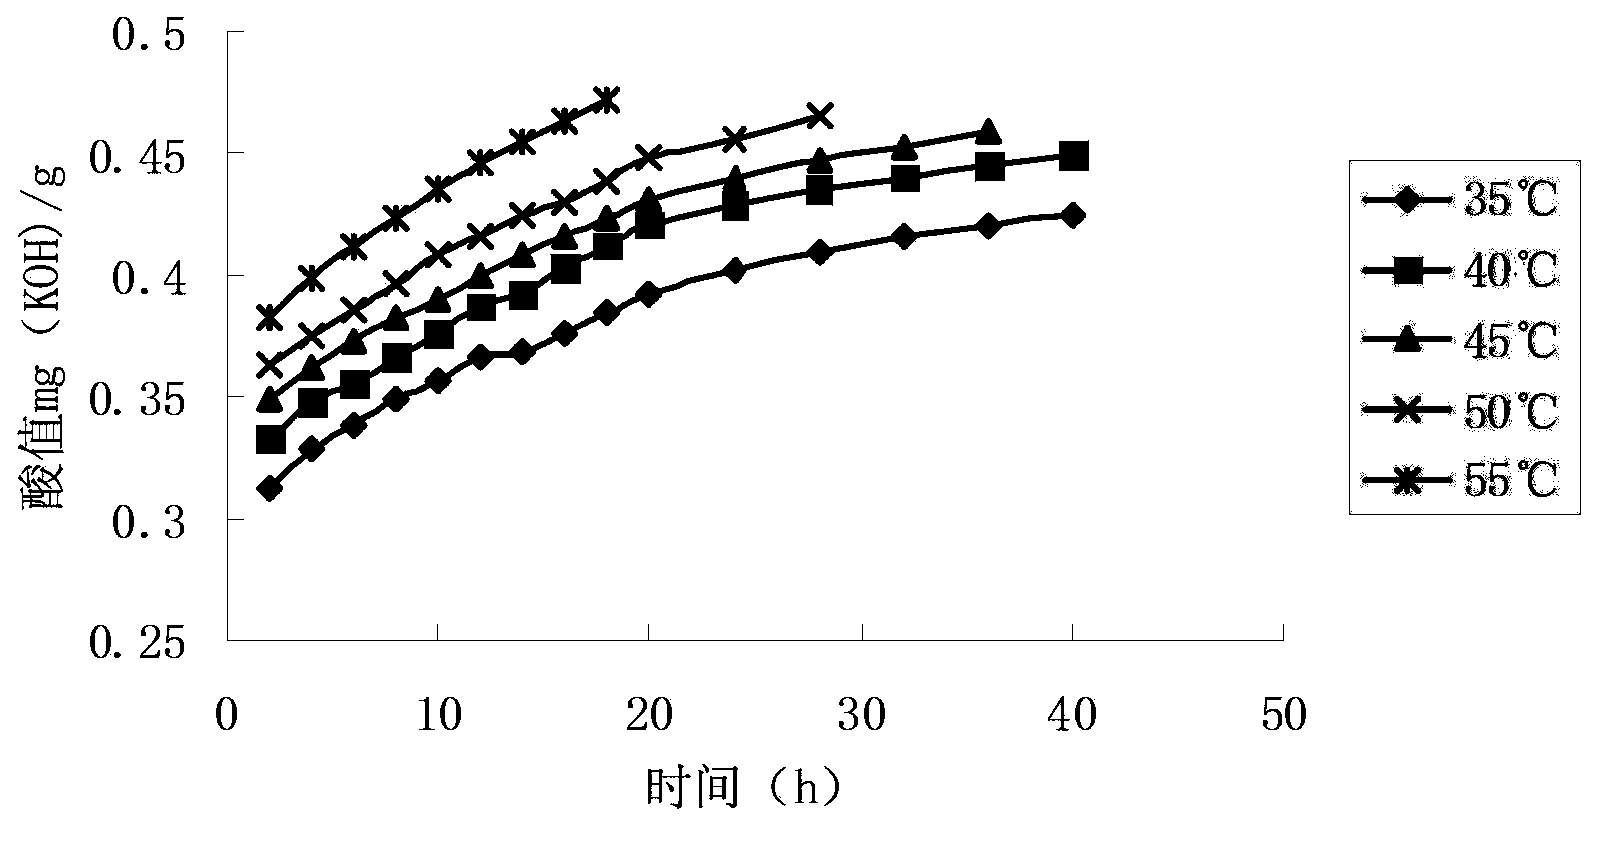 Method for drying walnuts with hot air based on parabolic temperature rise method